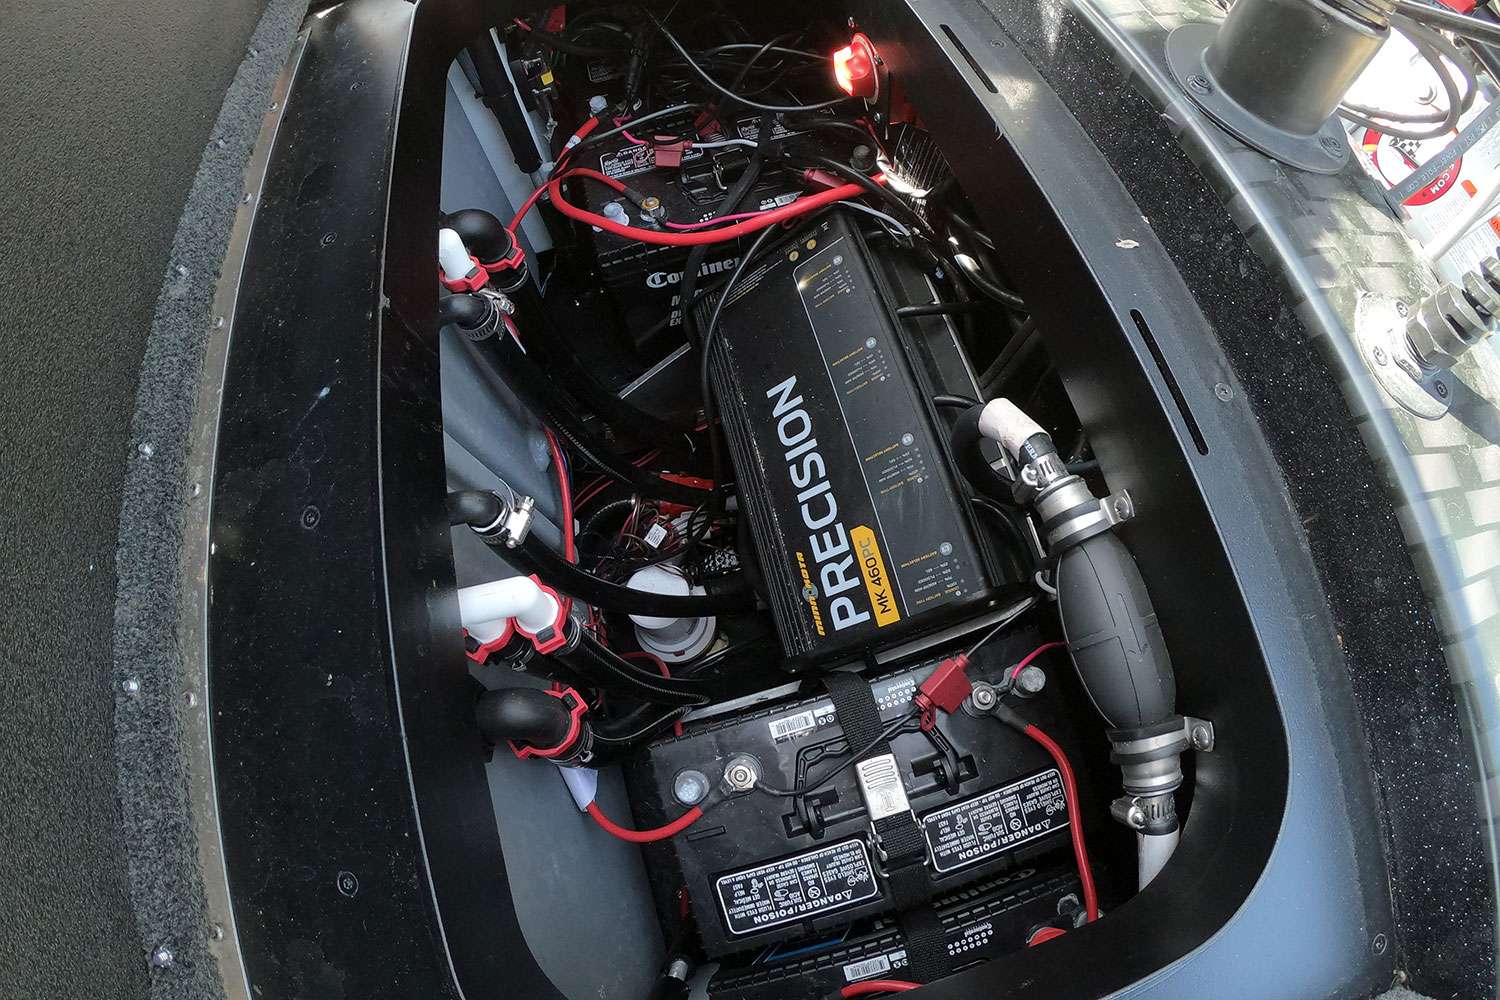 Here's a look at the Skeeter's powerplant.